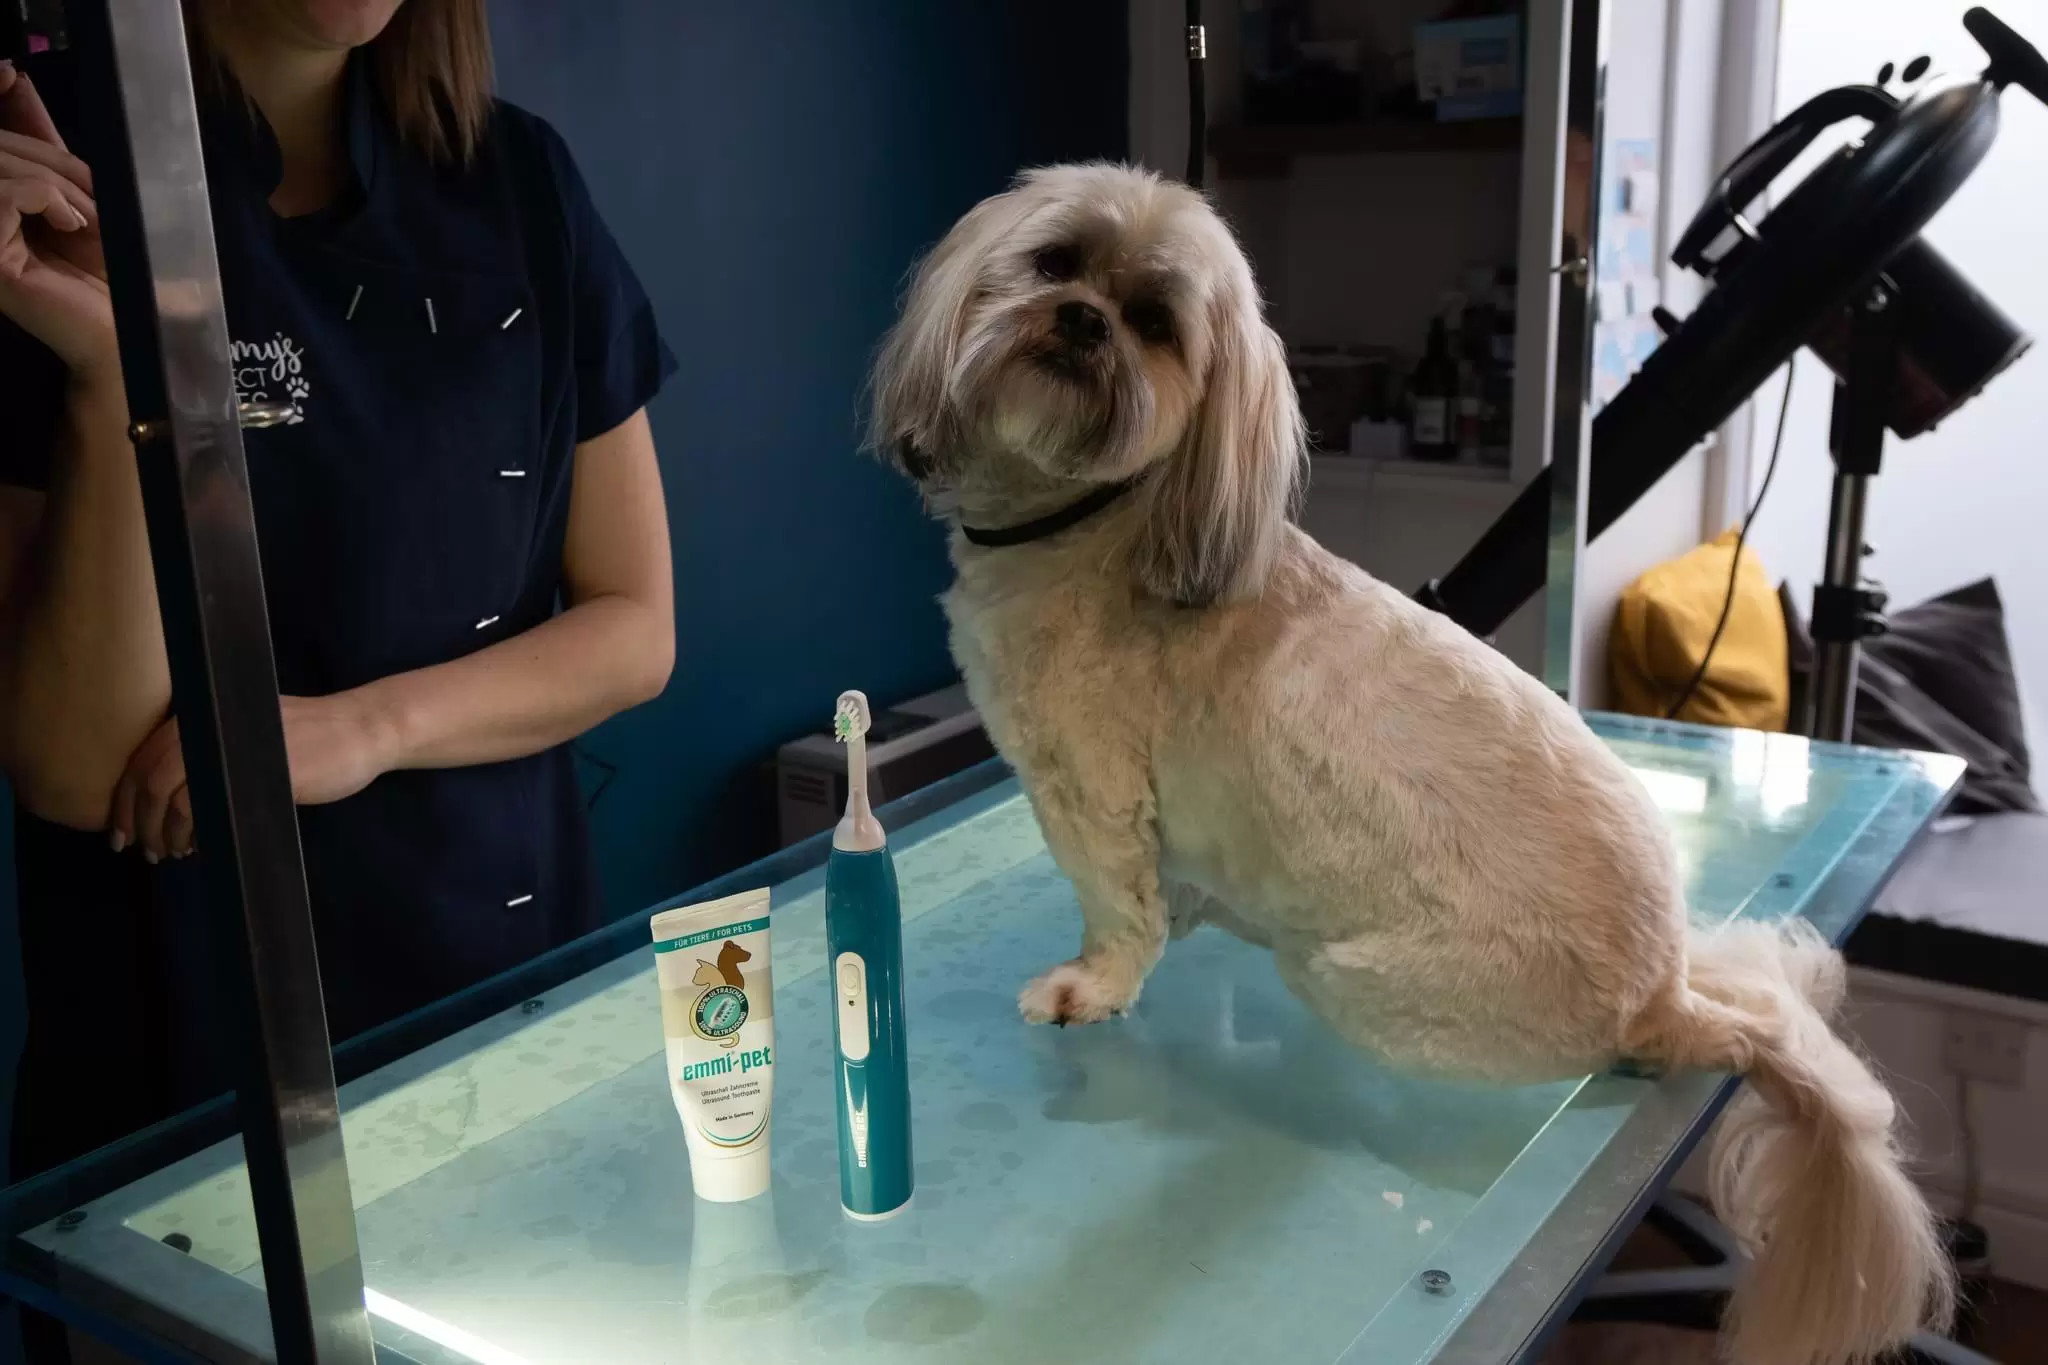 Dog with Emmi-Pet Ultrasonic Toothbrush getting her teeth cleaned